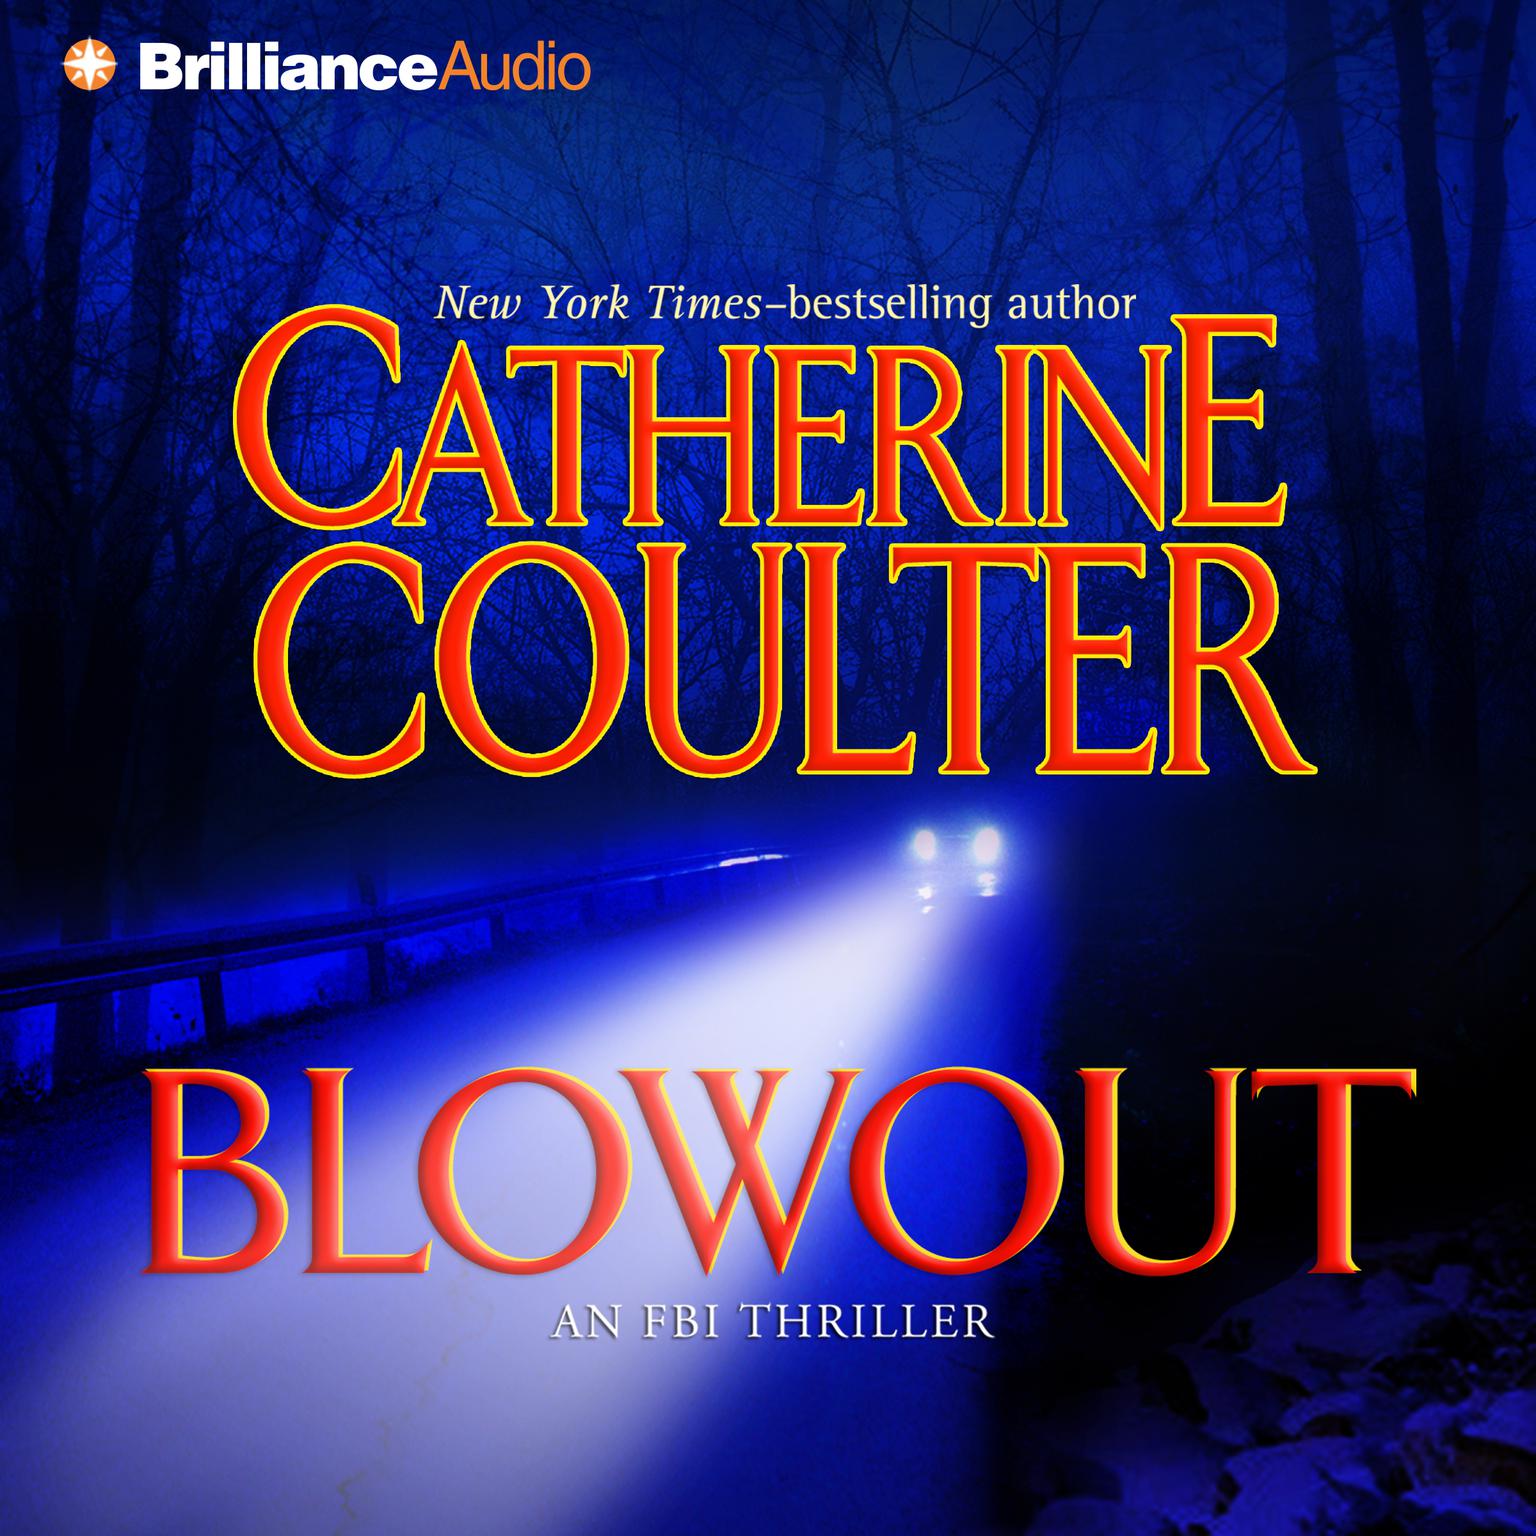 Blowout (Abridged): An FBI Thriller Audiobook, by Catherine Coulter